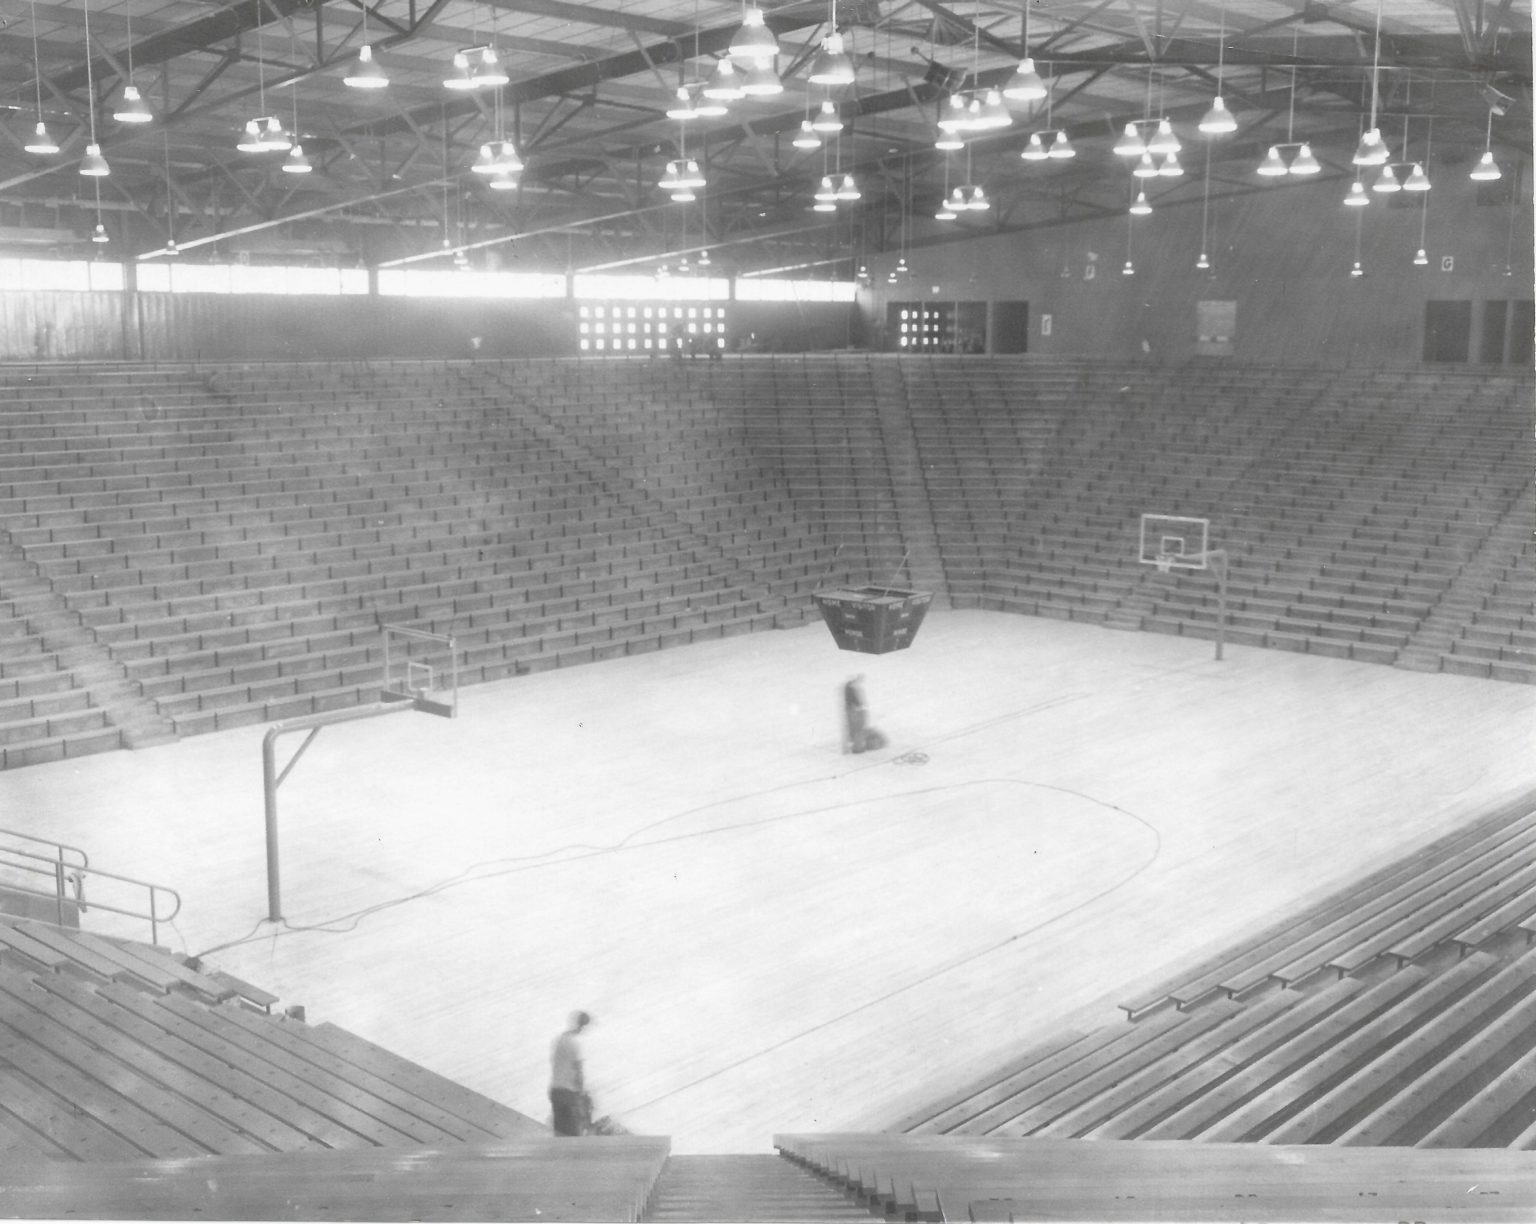 Indiana Basketball HOF to recognize 60 years of New Castle Fieldhouse